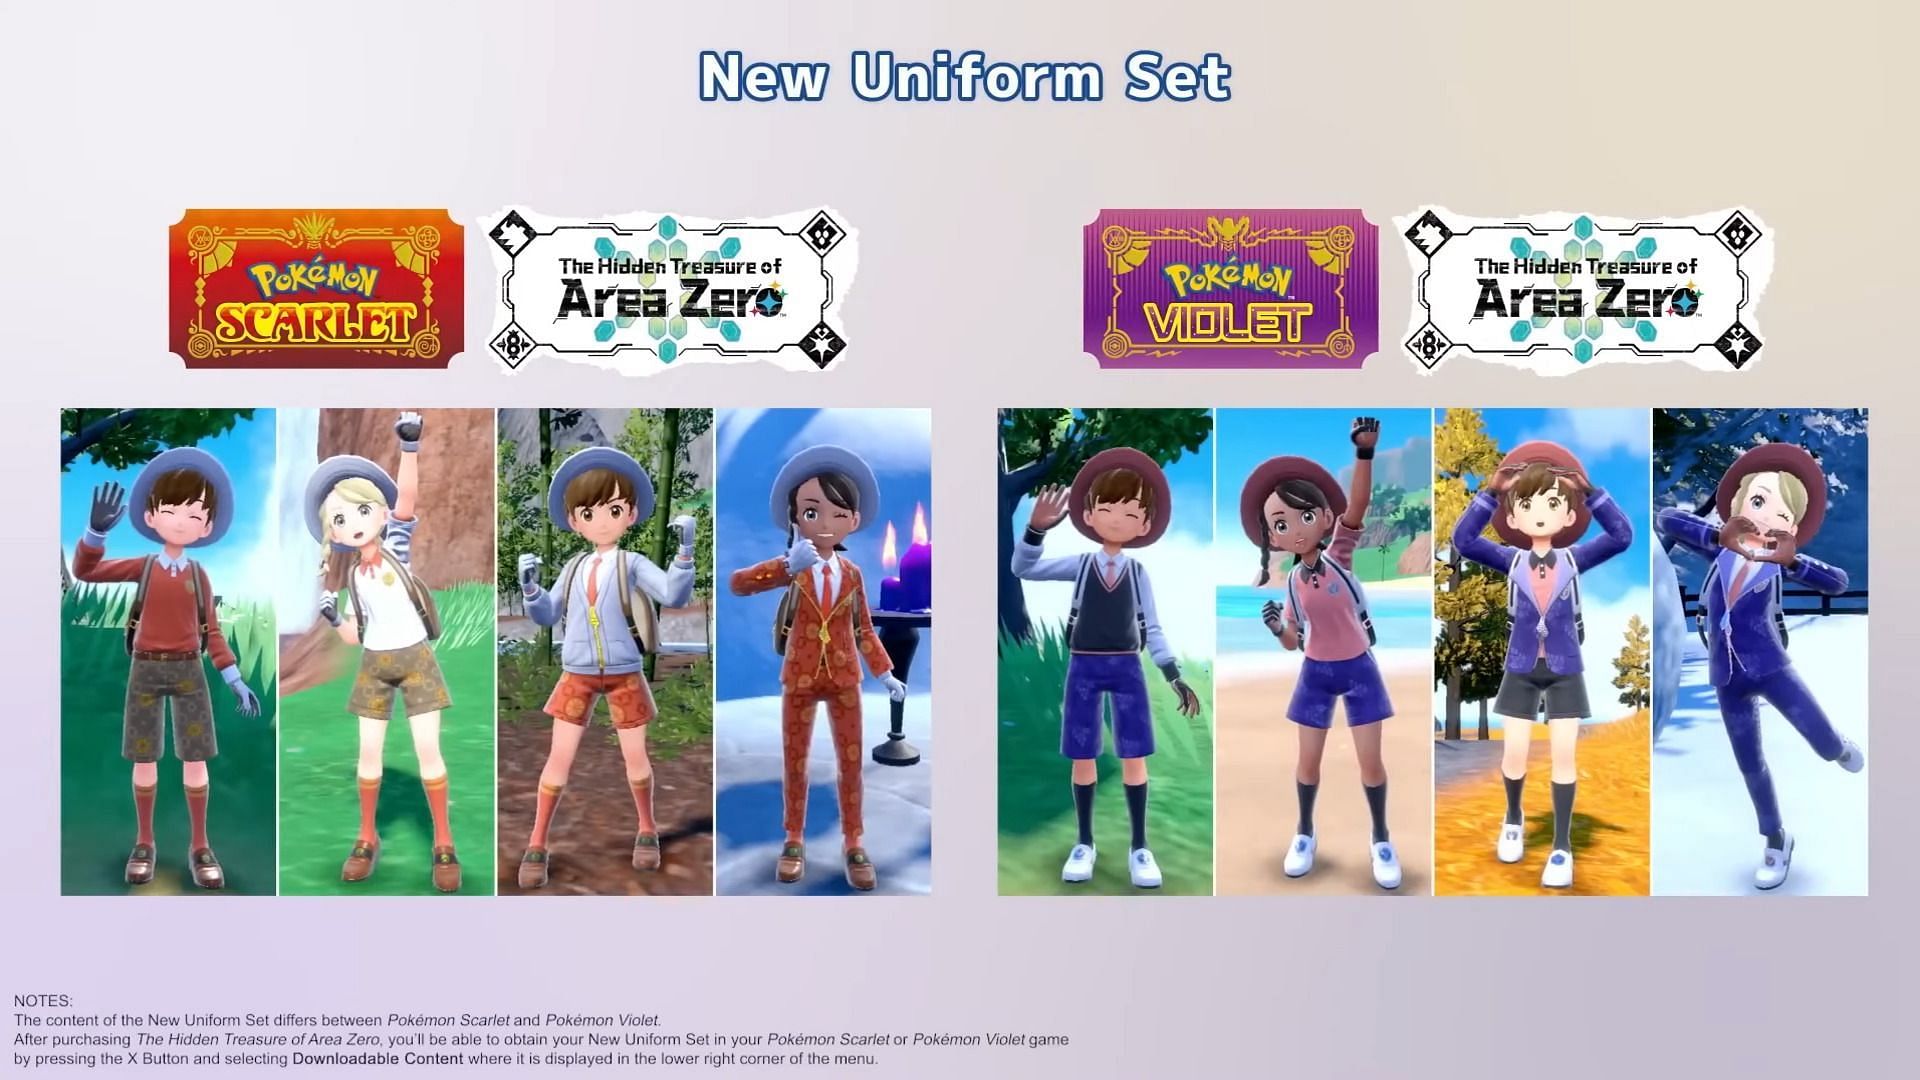 Pokemon Scarlet and Violet: How to claim new DLC uniform sets in-game